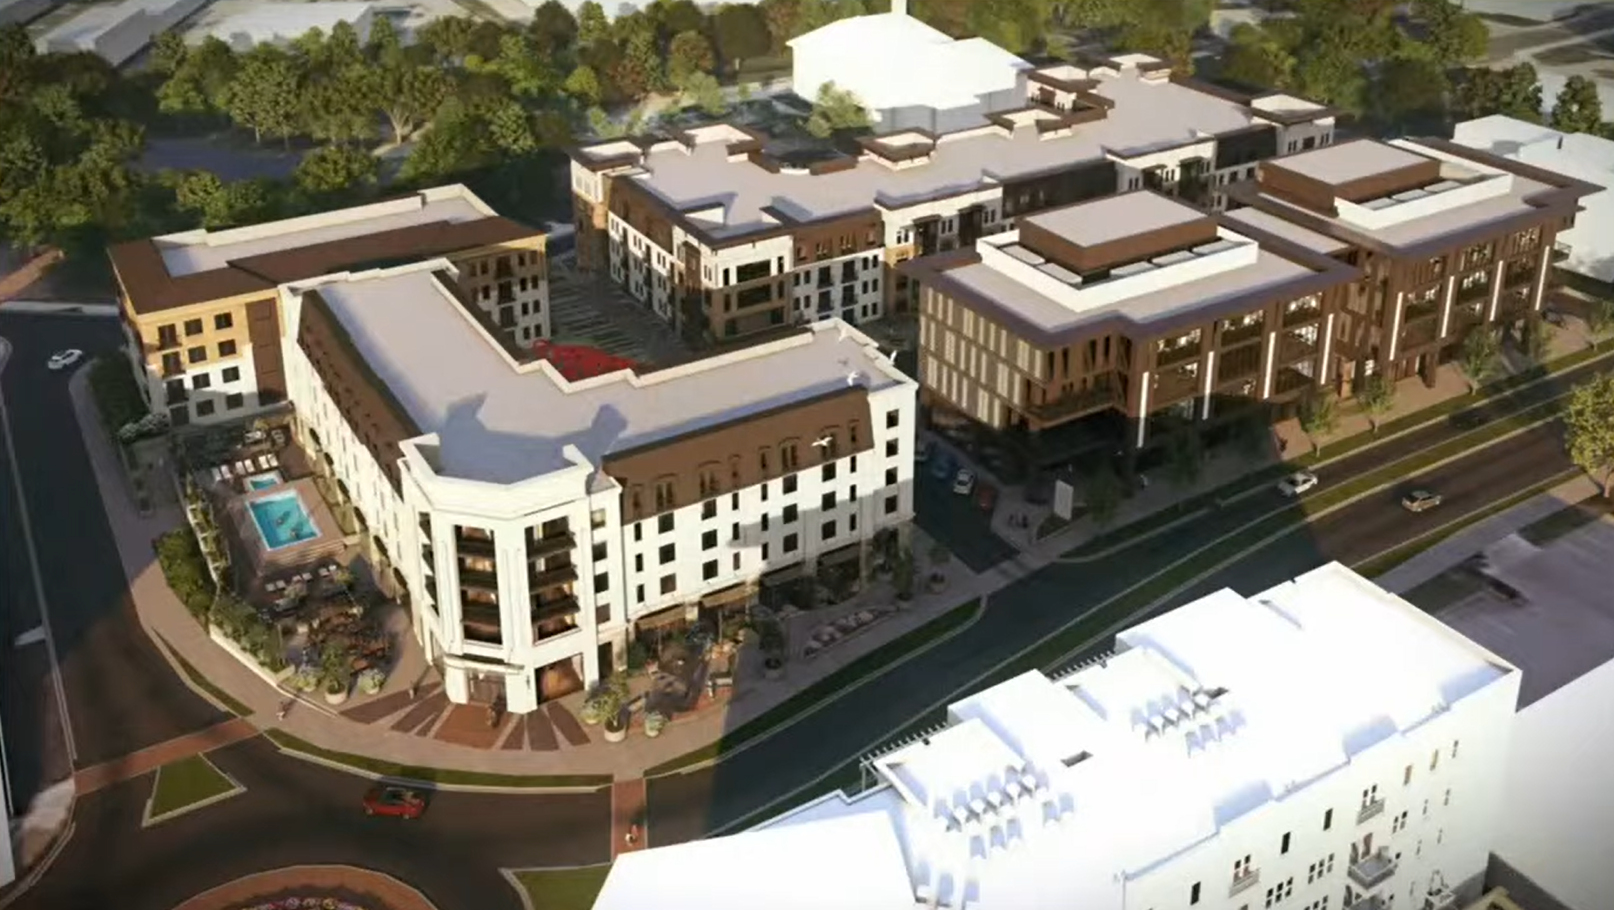 Developer planning $123M third phase of Carmel's Proscenium project – Indianapolis Business Journal